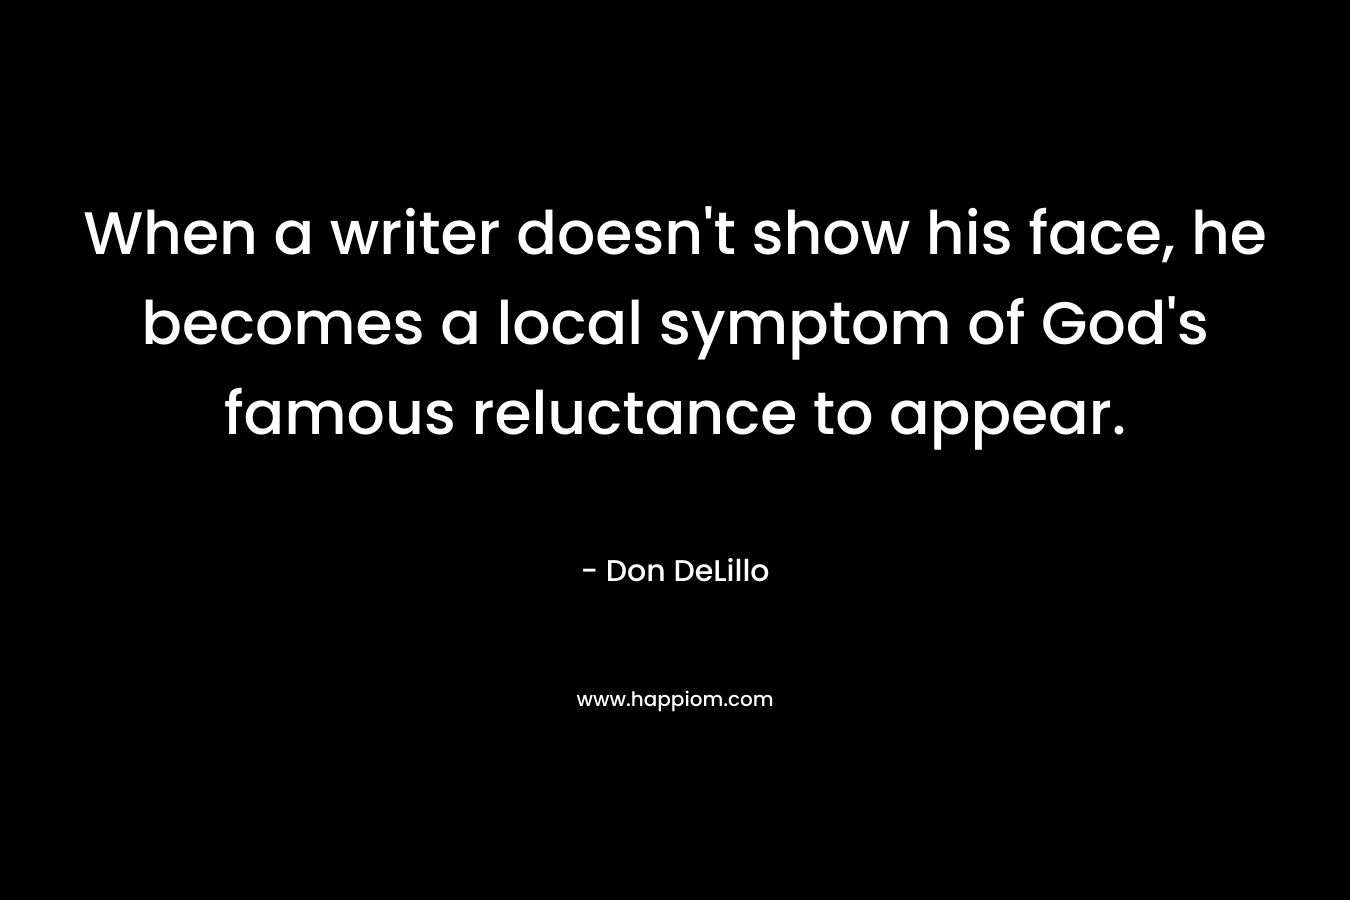 When a writer doesn’t show his face, he becomes a local symptom of God’s famous reluctance to appear. – Don DeLillo